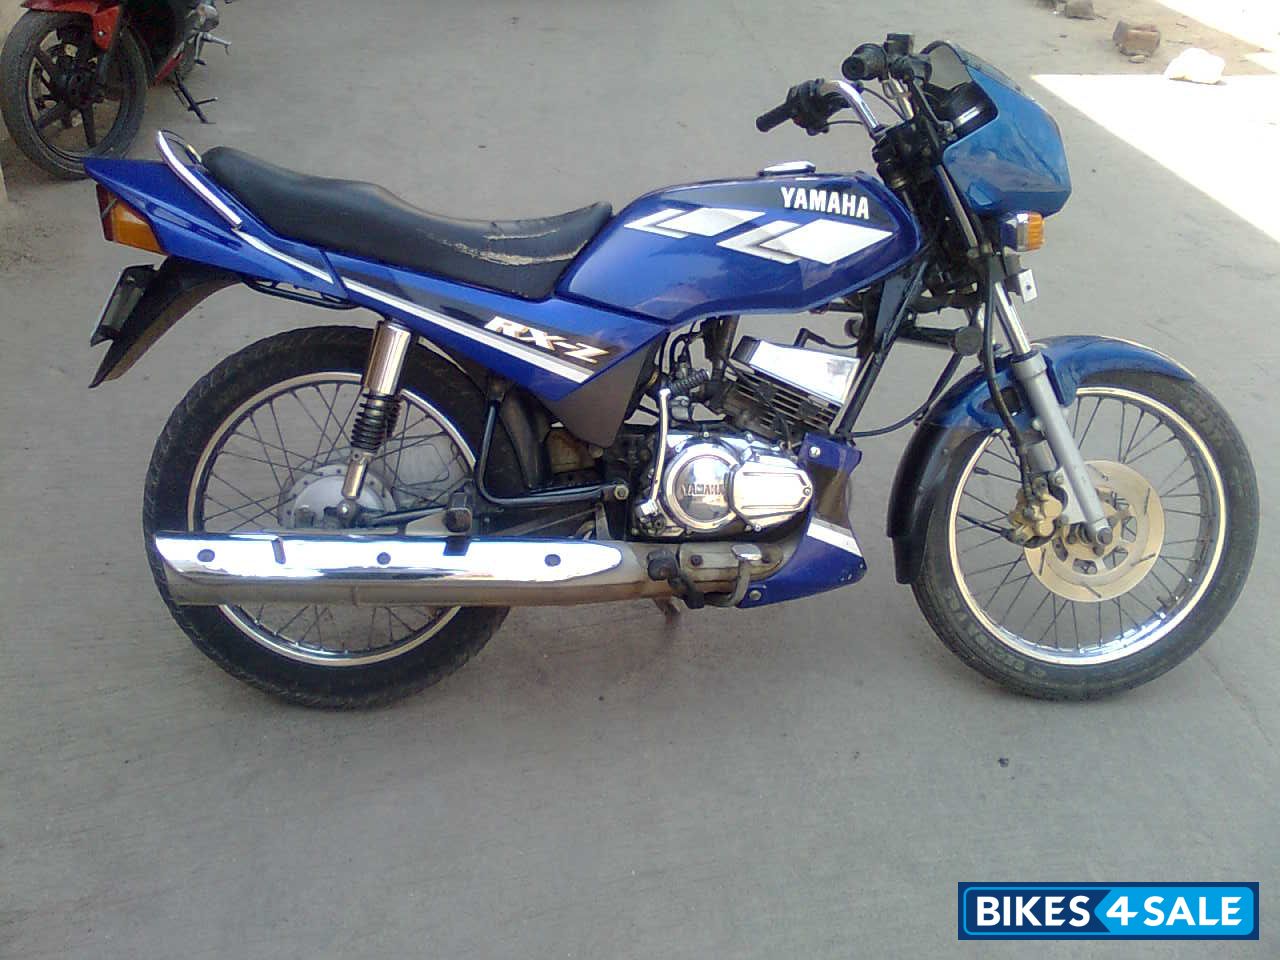 Pictures of Yamaha Rxz Picture 1 Bike Id Is 45035 Motorcycle Located In Andhra 